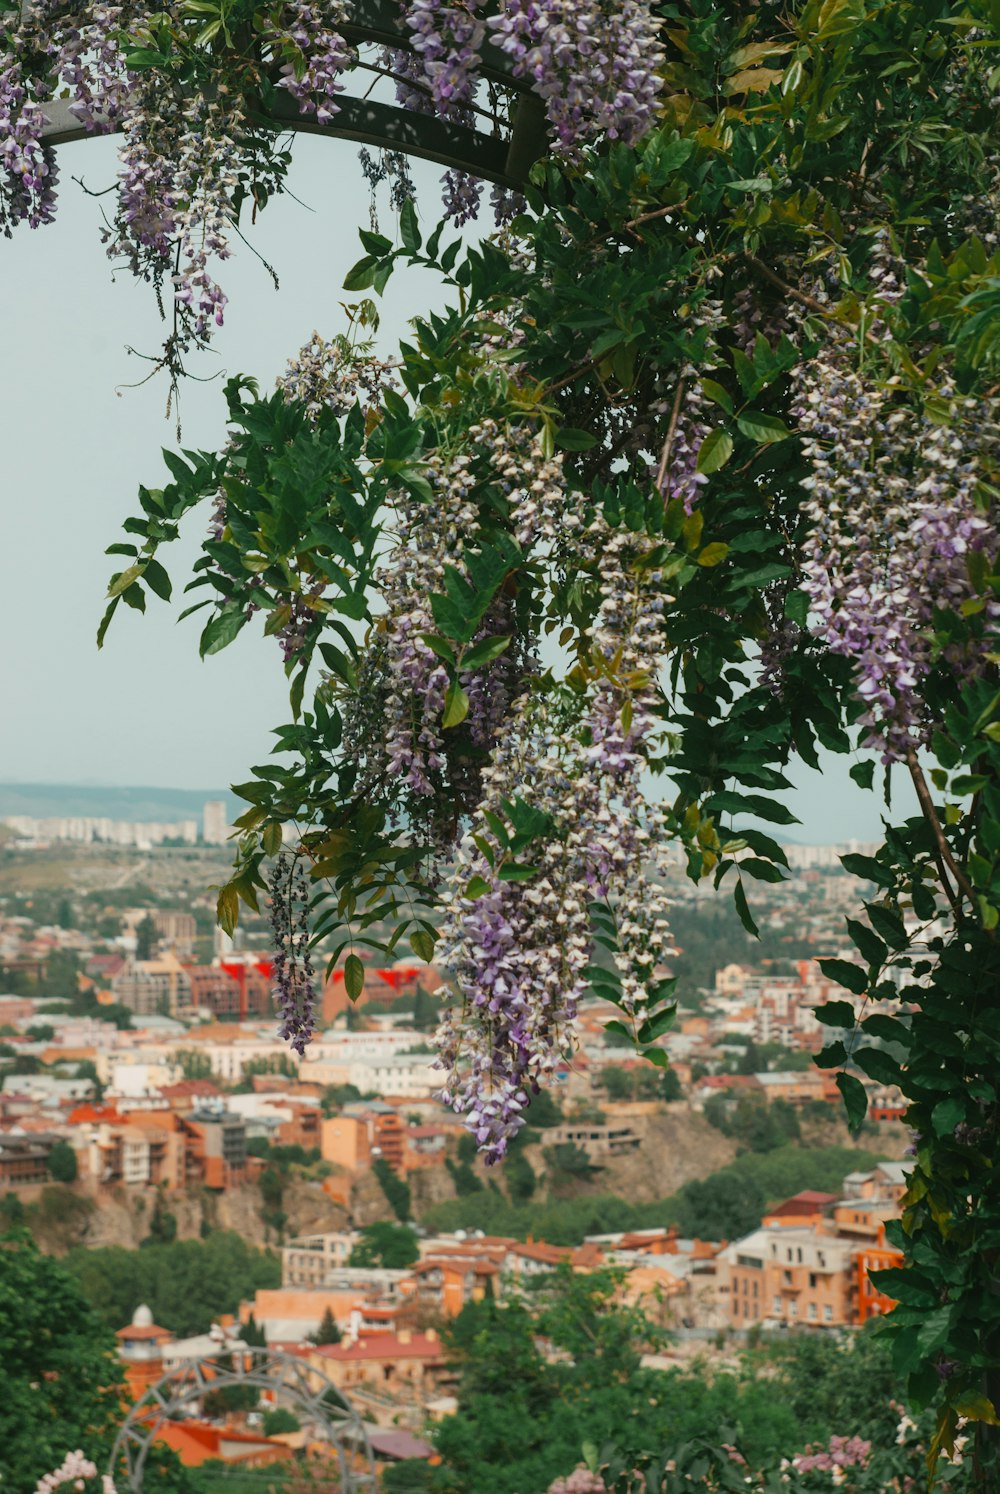 a view of a city with lots of purple flowers